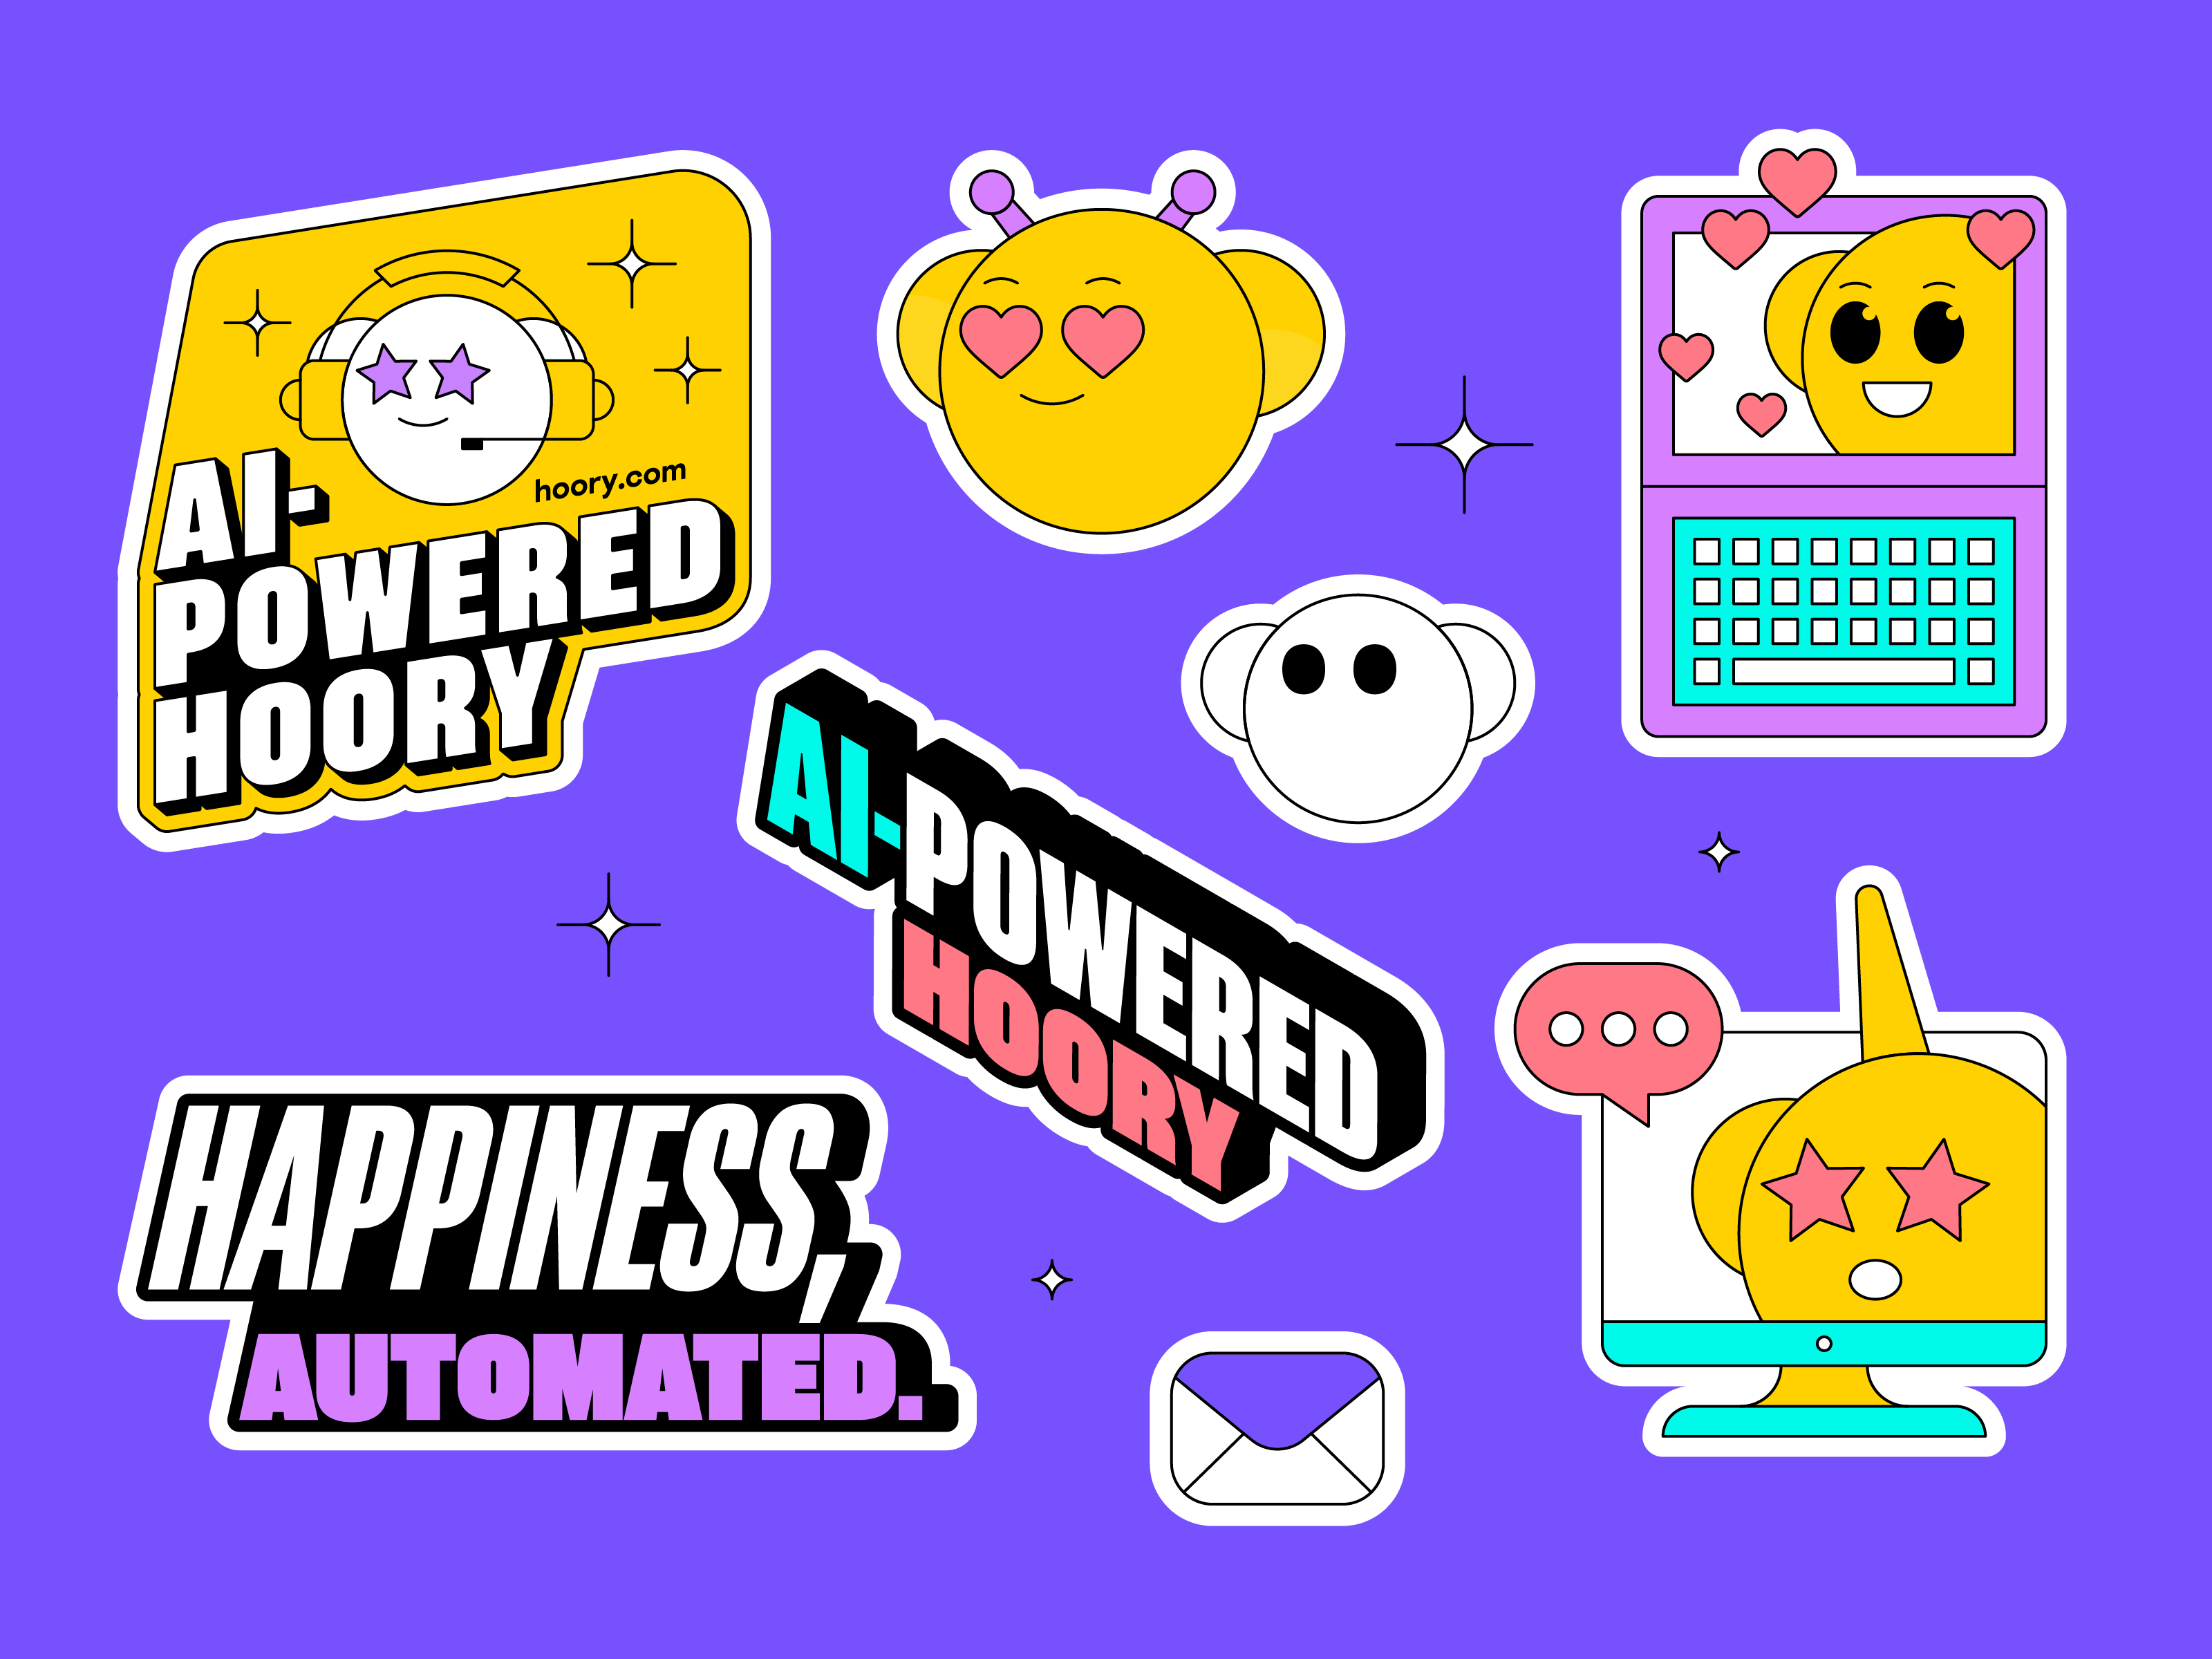 Stickers Set for Hoory ai ai customer support armenia character design colorful design graphic design graphicdesign illustration illustration design lineart sticker sticker collection sticker design sticker set ui vector vectorart visualgraphics